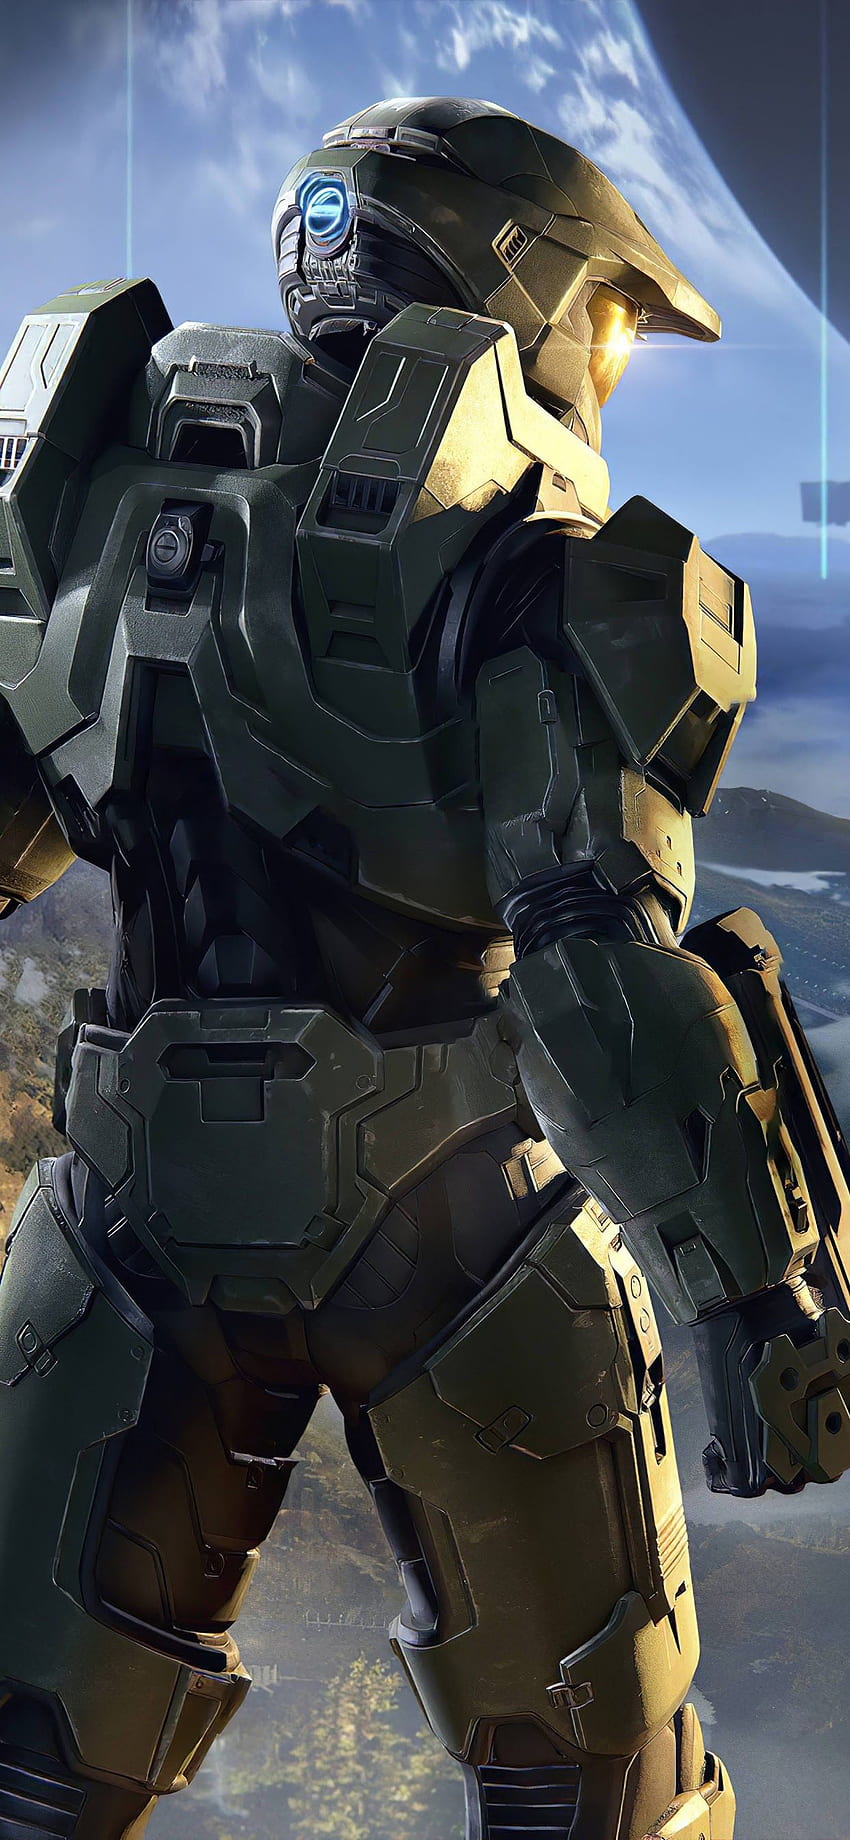 Mobile wallpaper Halo Helmet Video Game Master Chief Halo Infinite  1155979 download the picture for free